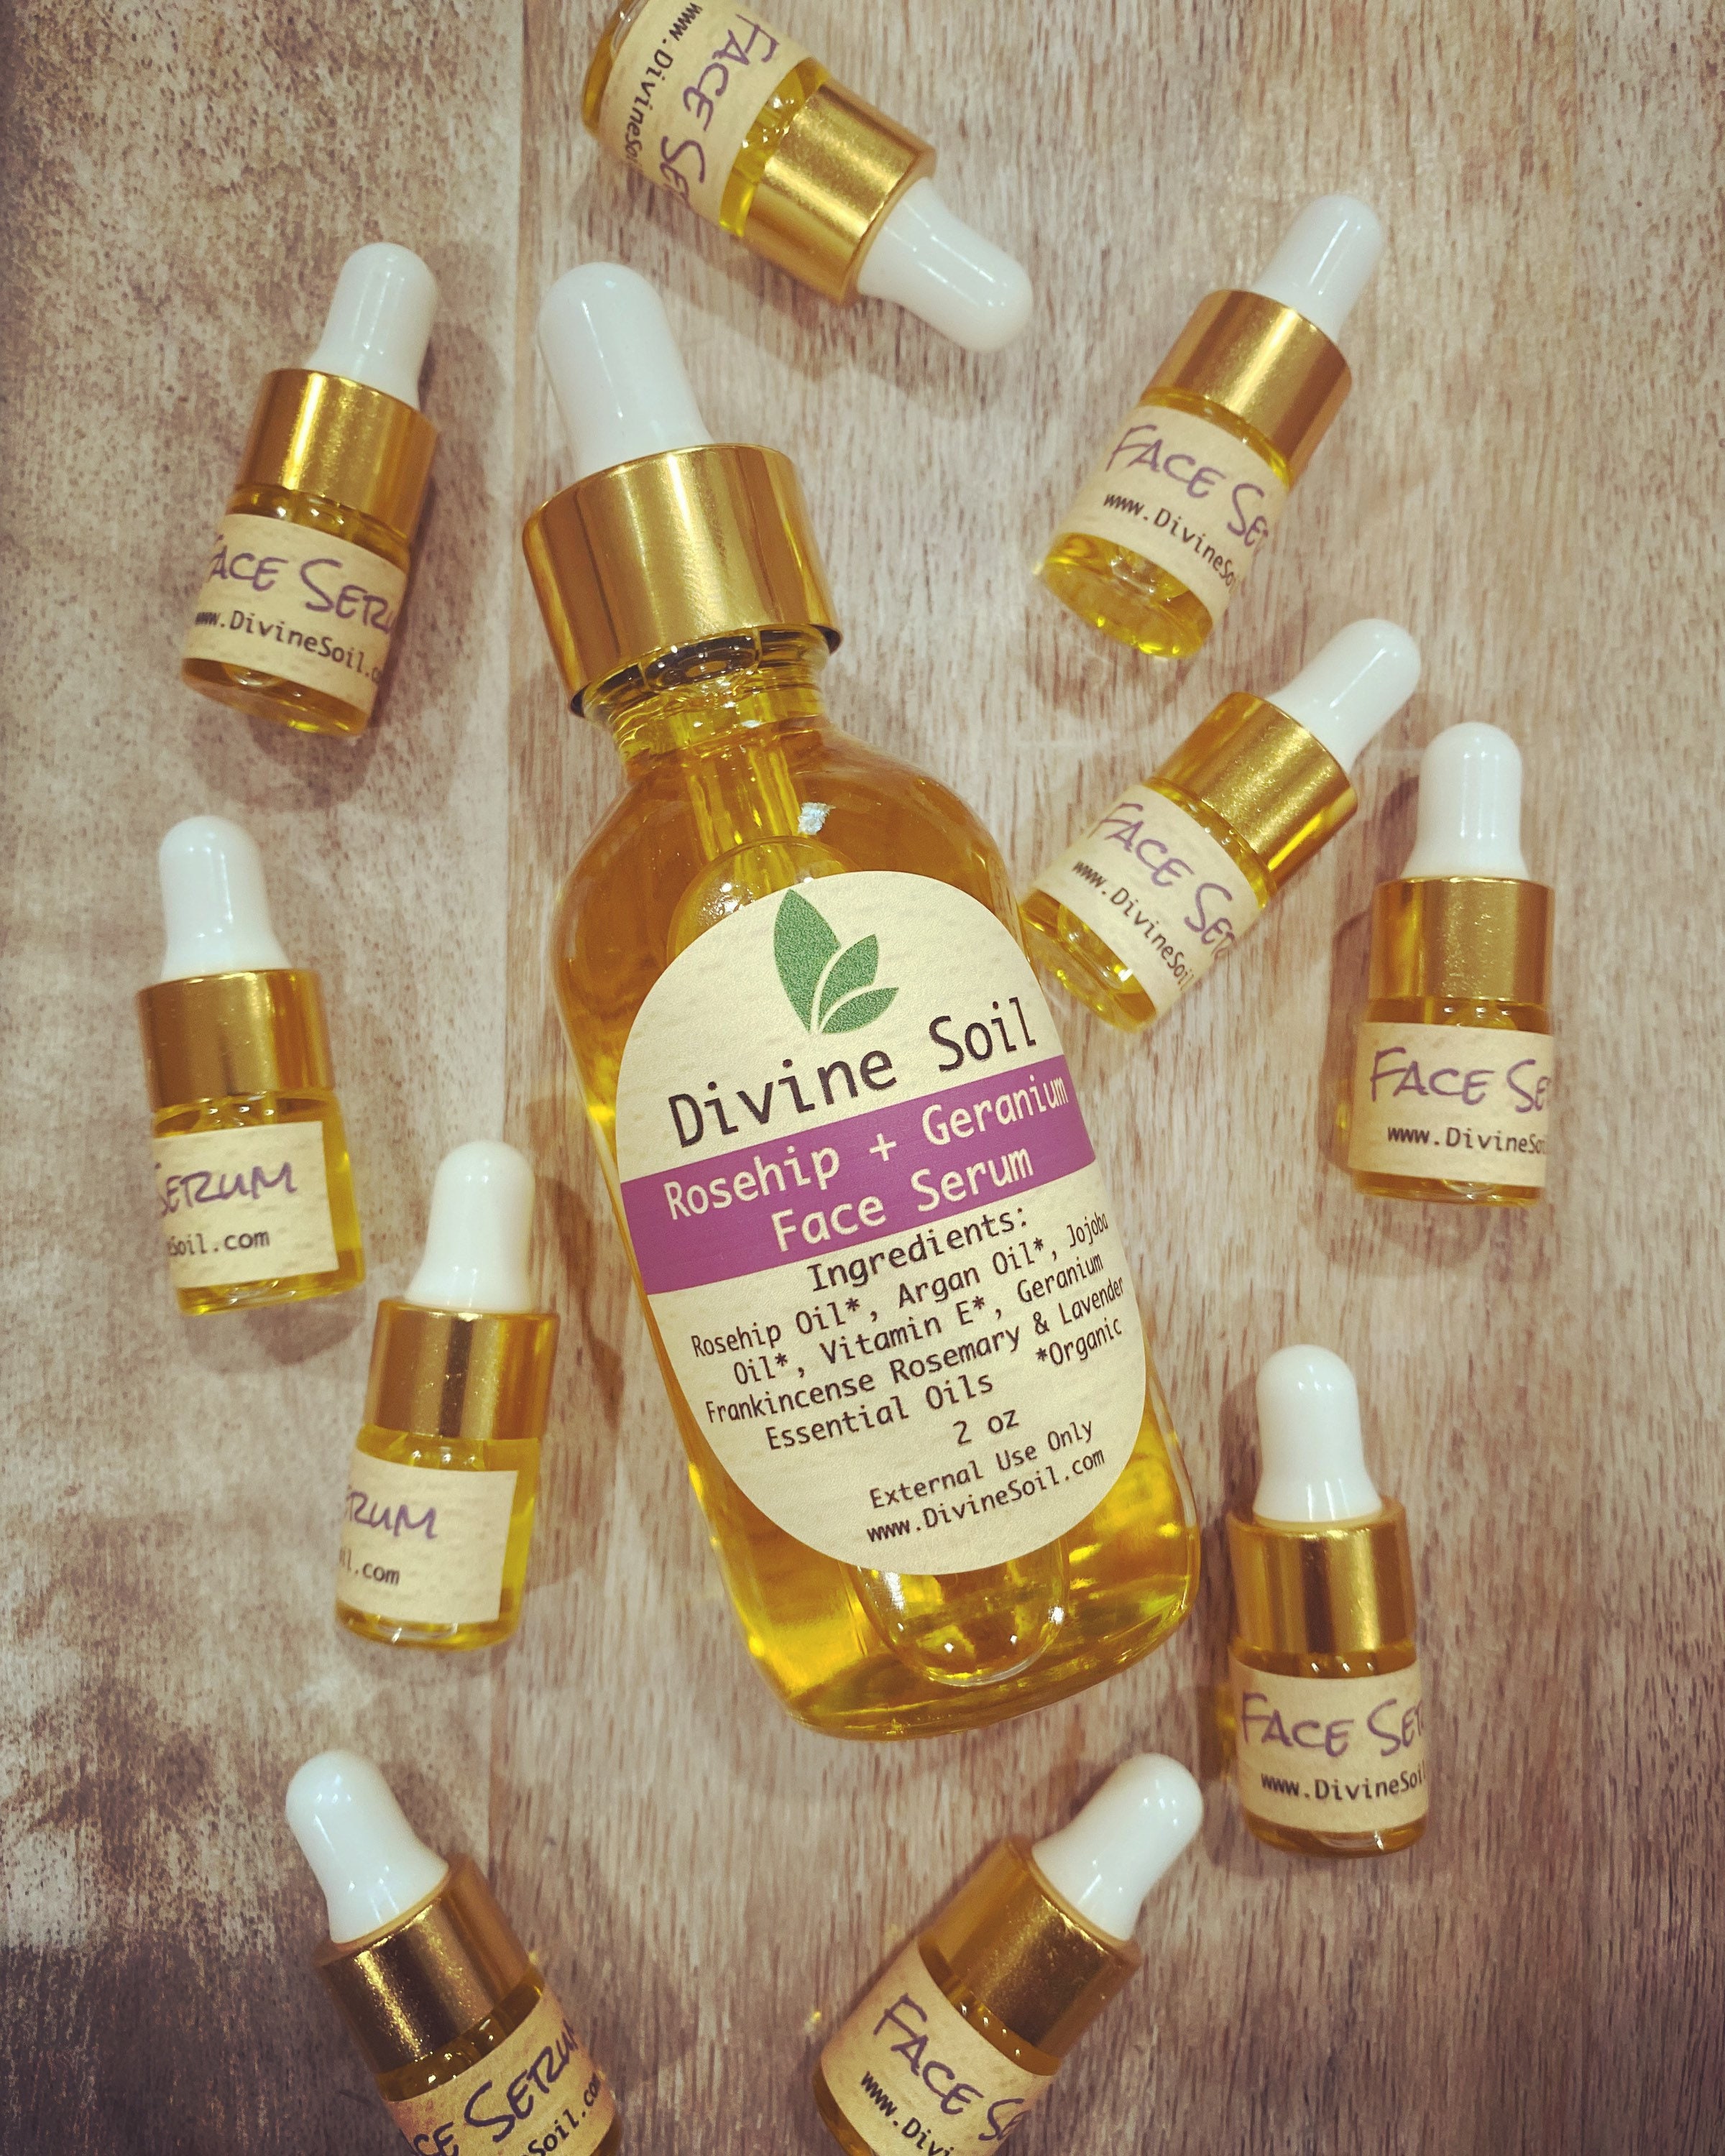 Prickly Pear Seed Oil ELIXIR Lavender and Frankincense Night Serum.